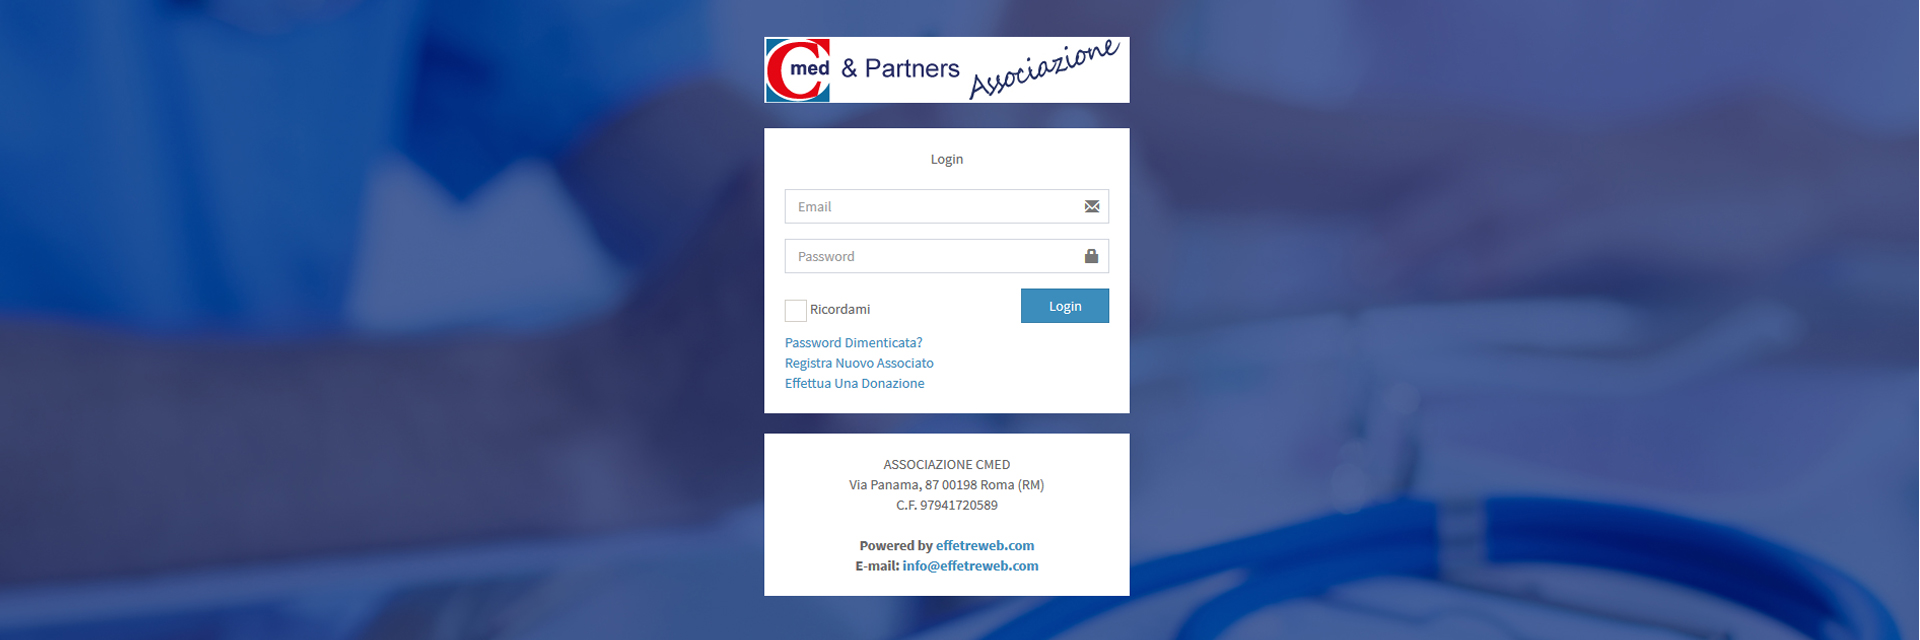 CMed and Partners (web)